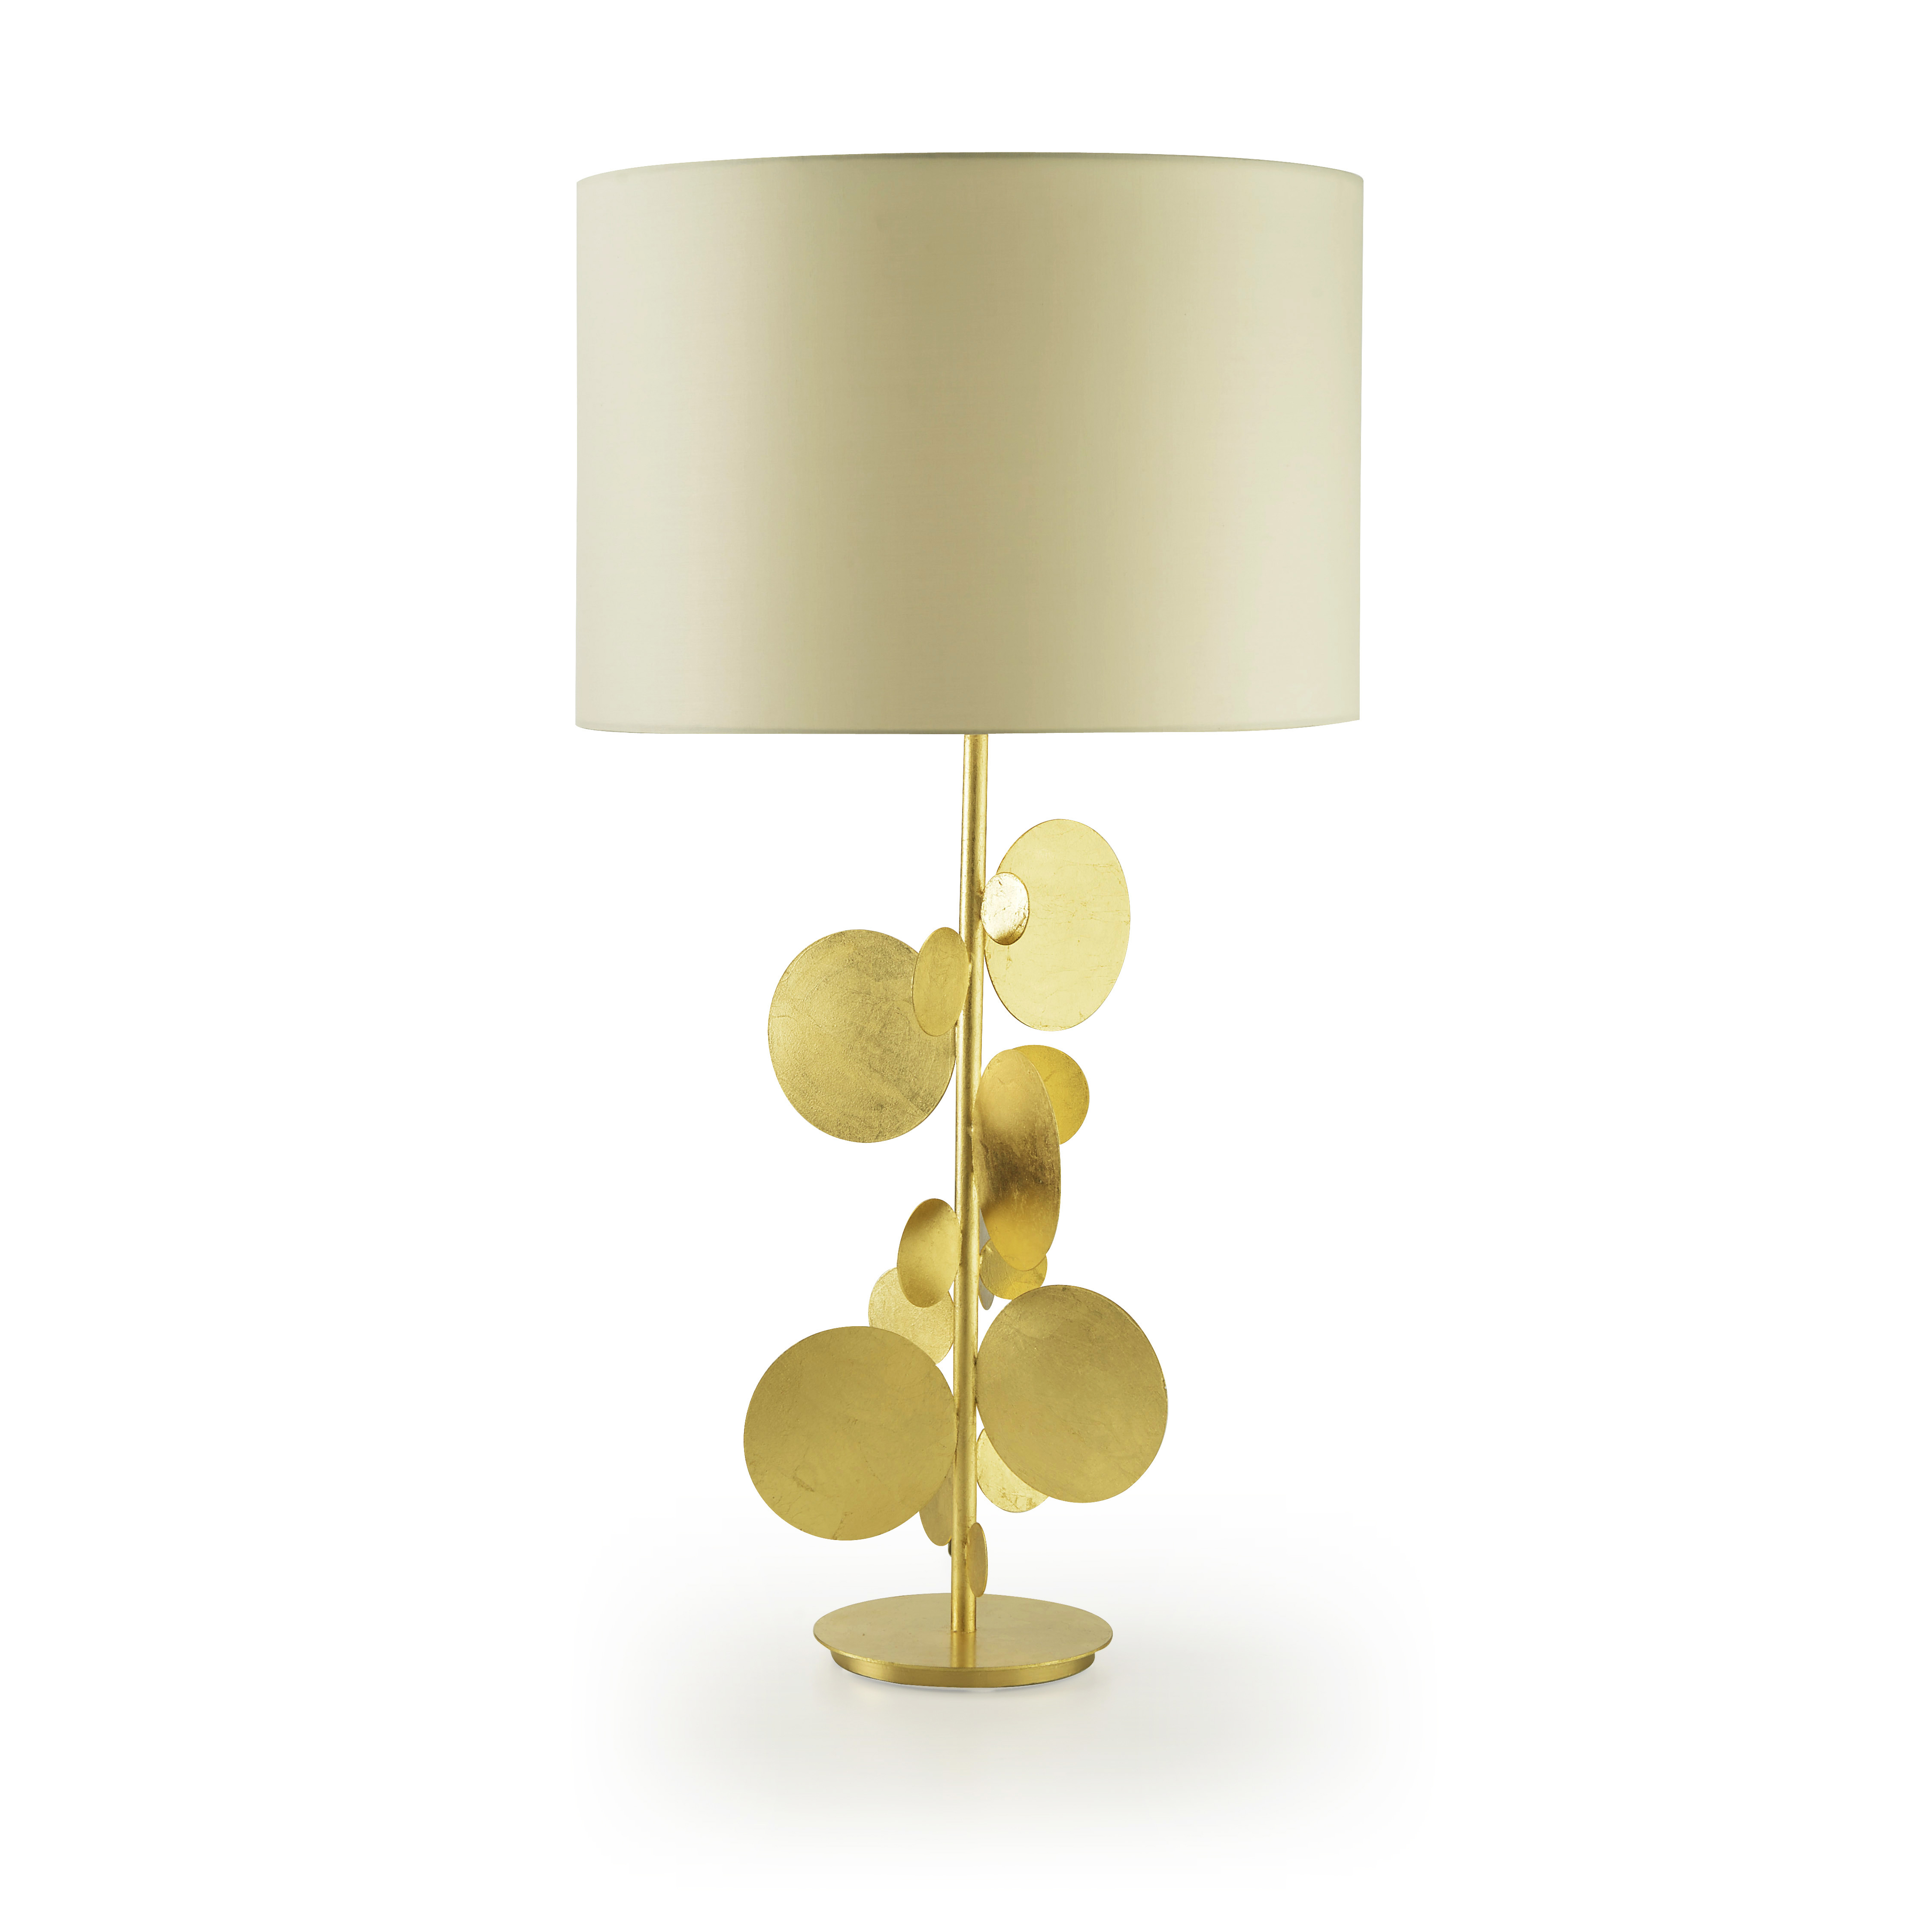 Orion - Tall table lamp